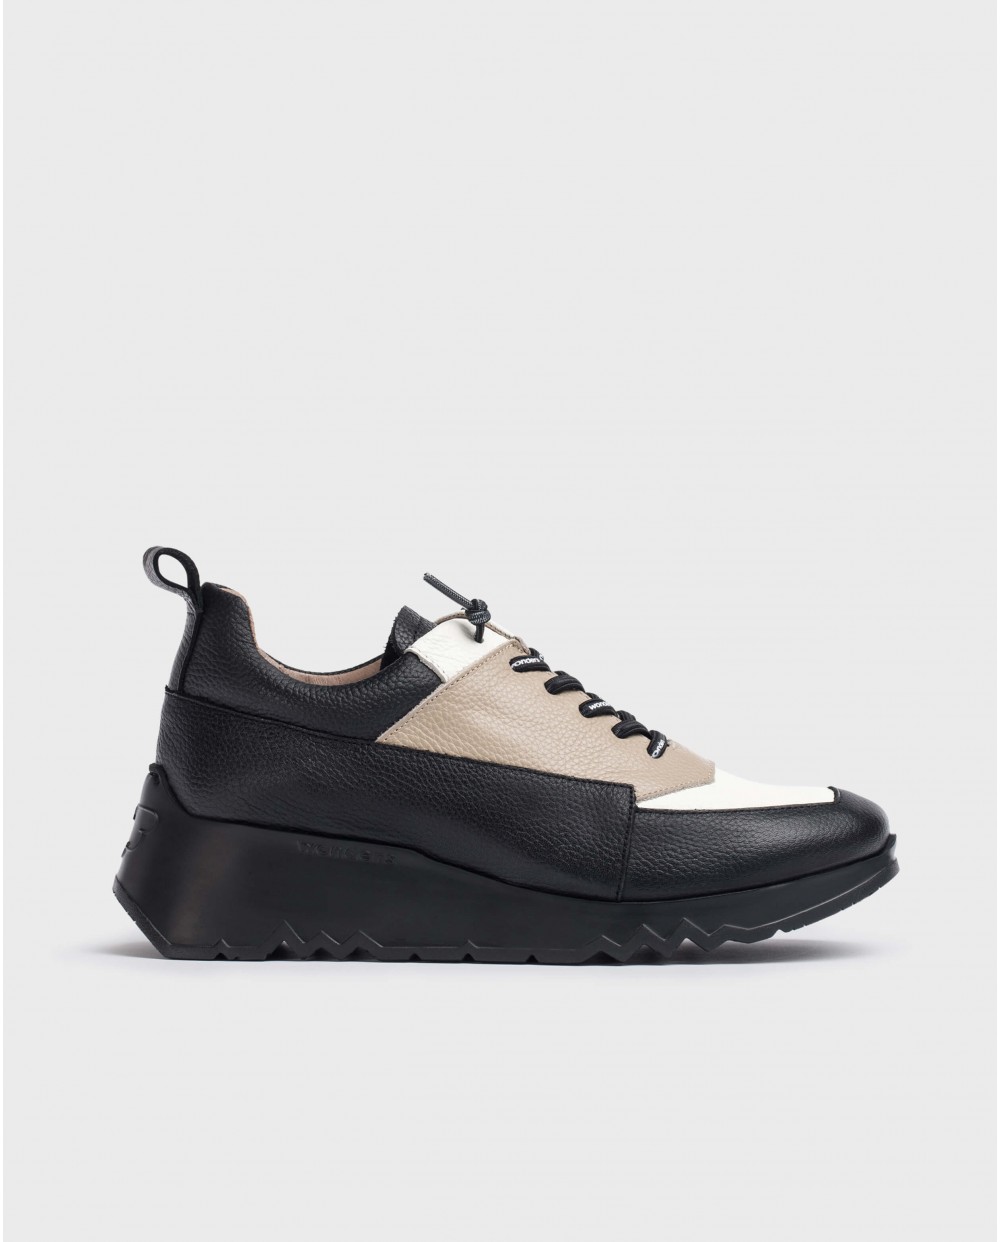 Wonders-NEW IN-Tricolor Suki trainers